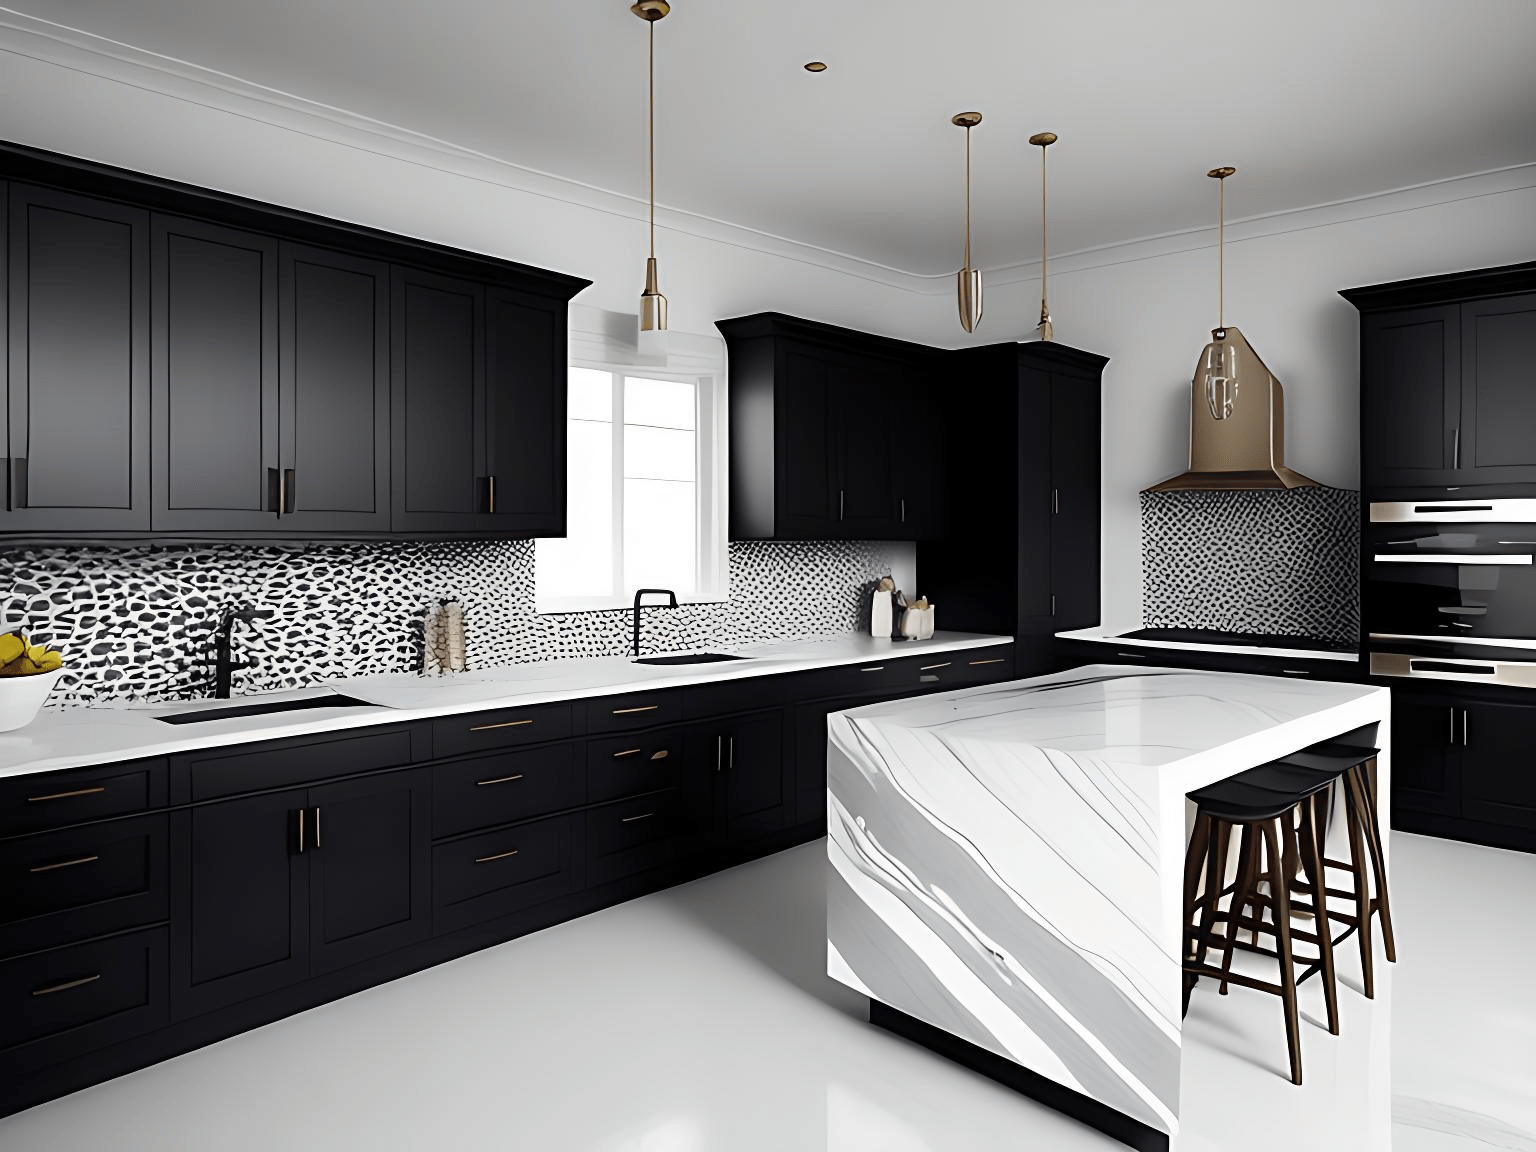 https://www.factoryplaza.com/wp-content/uploads/2023/04/Black-kitchen-cabinets-and-white-quartz-calacatta-waterfall-island-.png